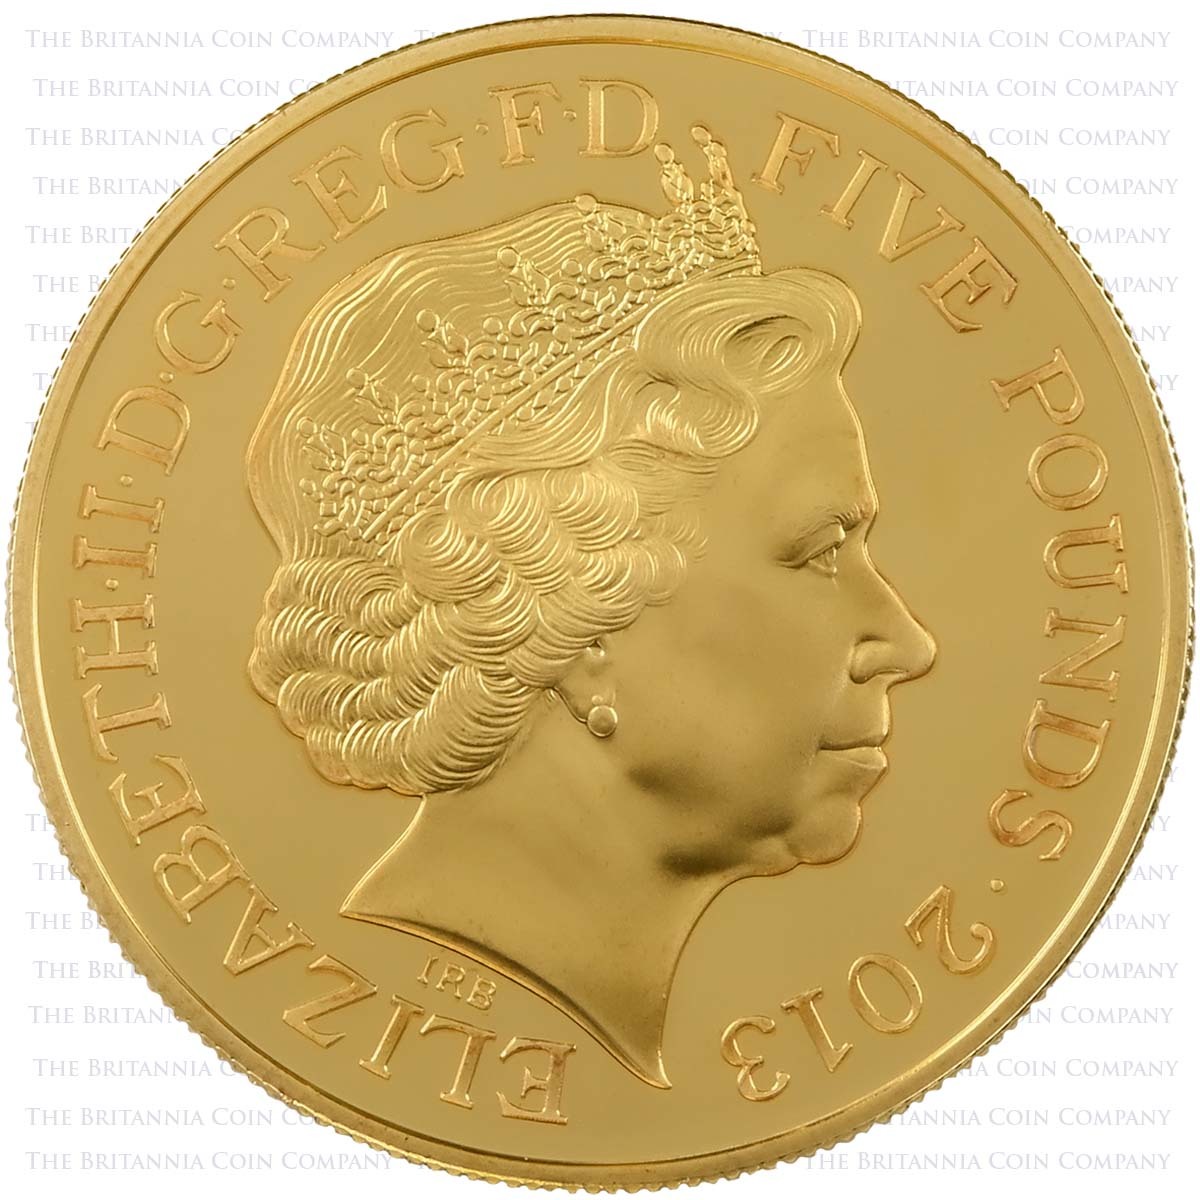 UKCAPG 2013 Queen’s Coronation 60th Anniversary £5 Crown Gold Plated Silver Proof Obverse